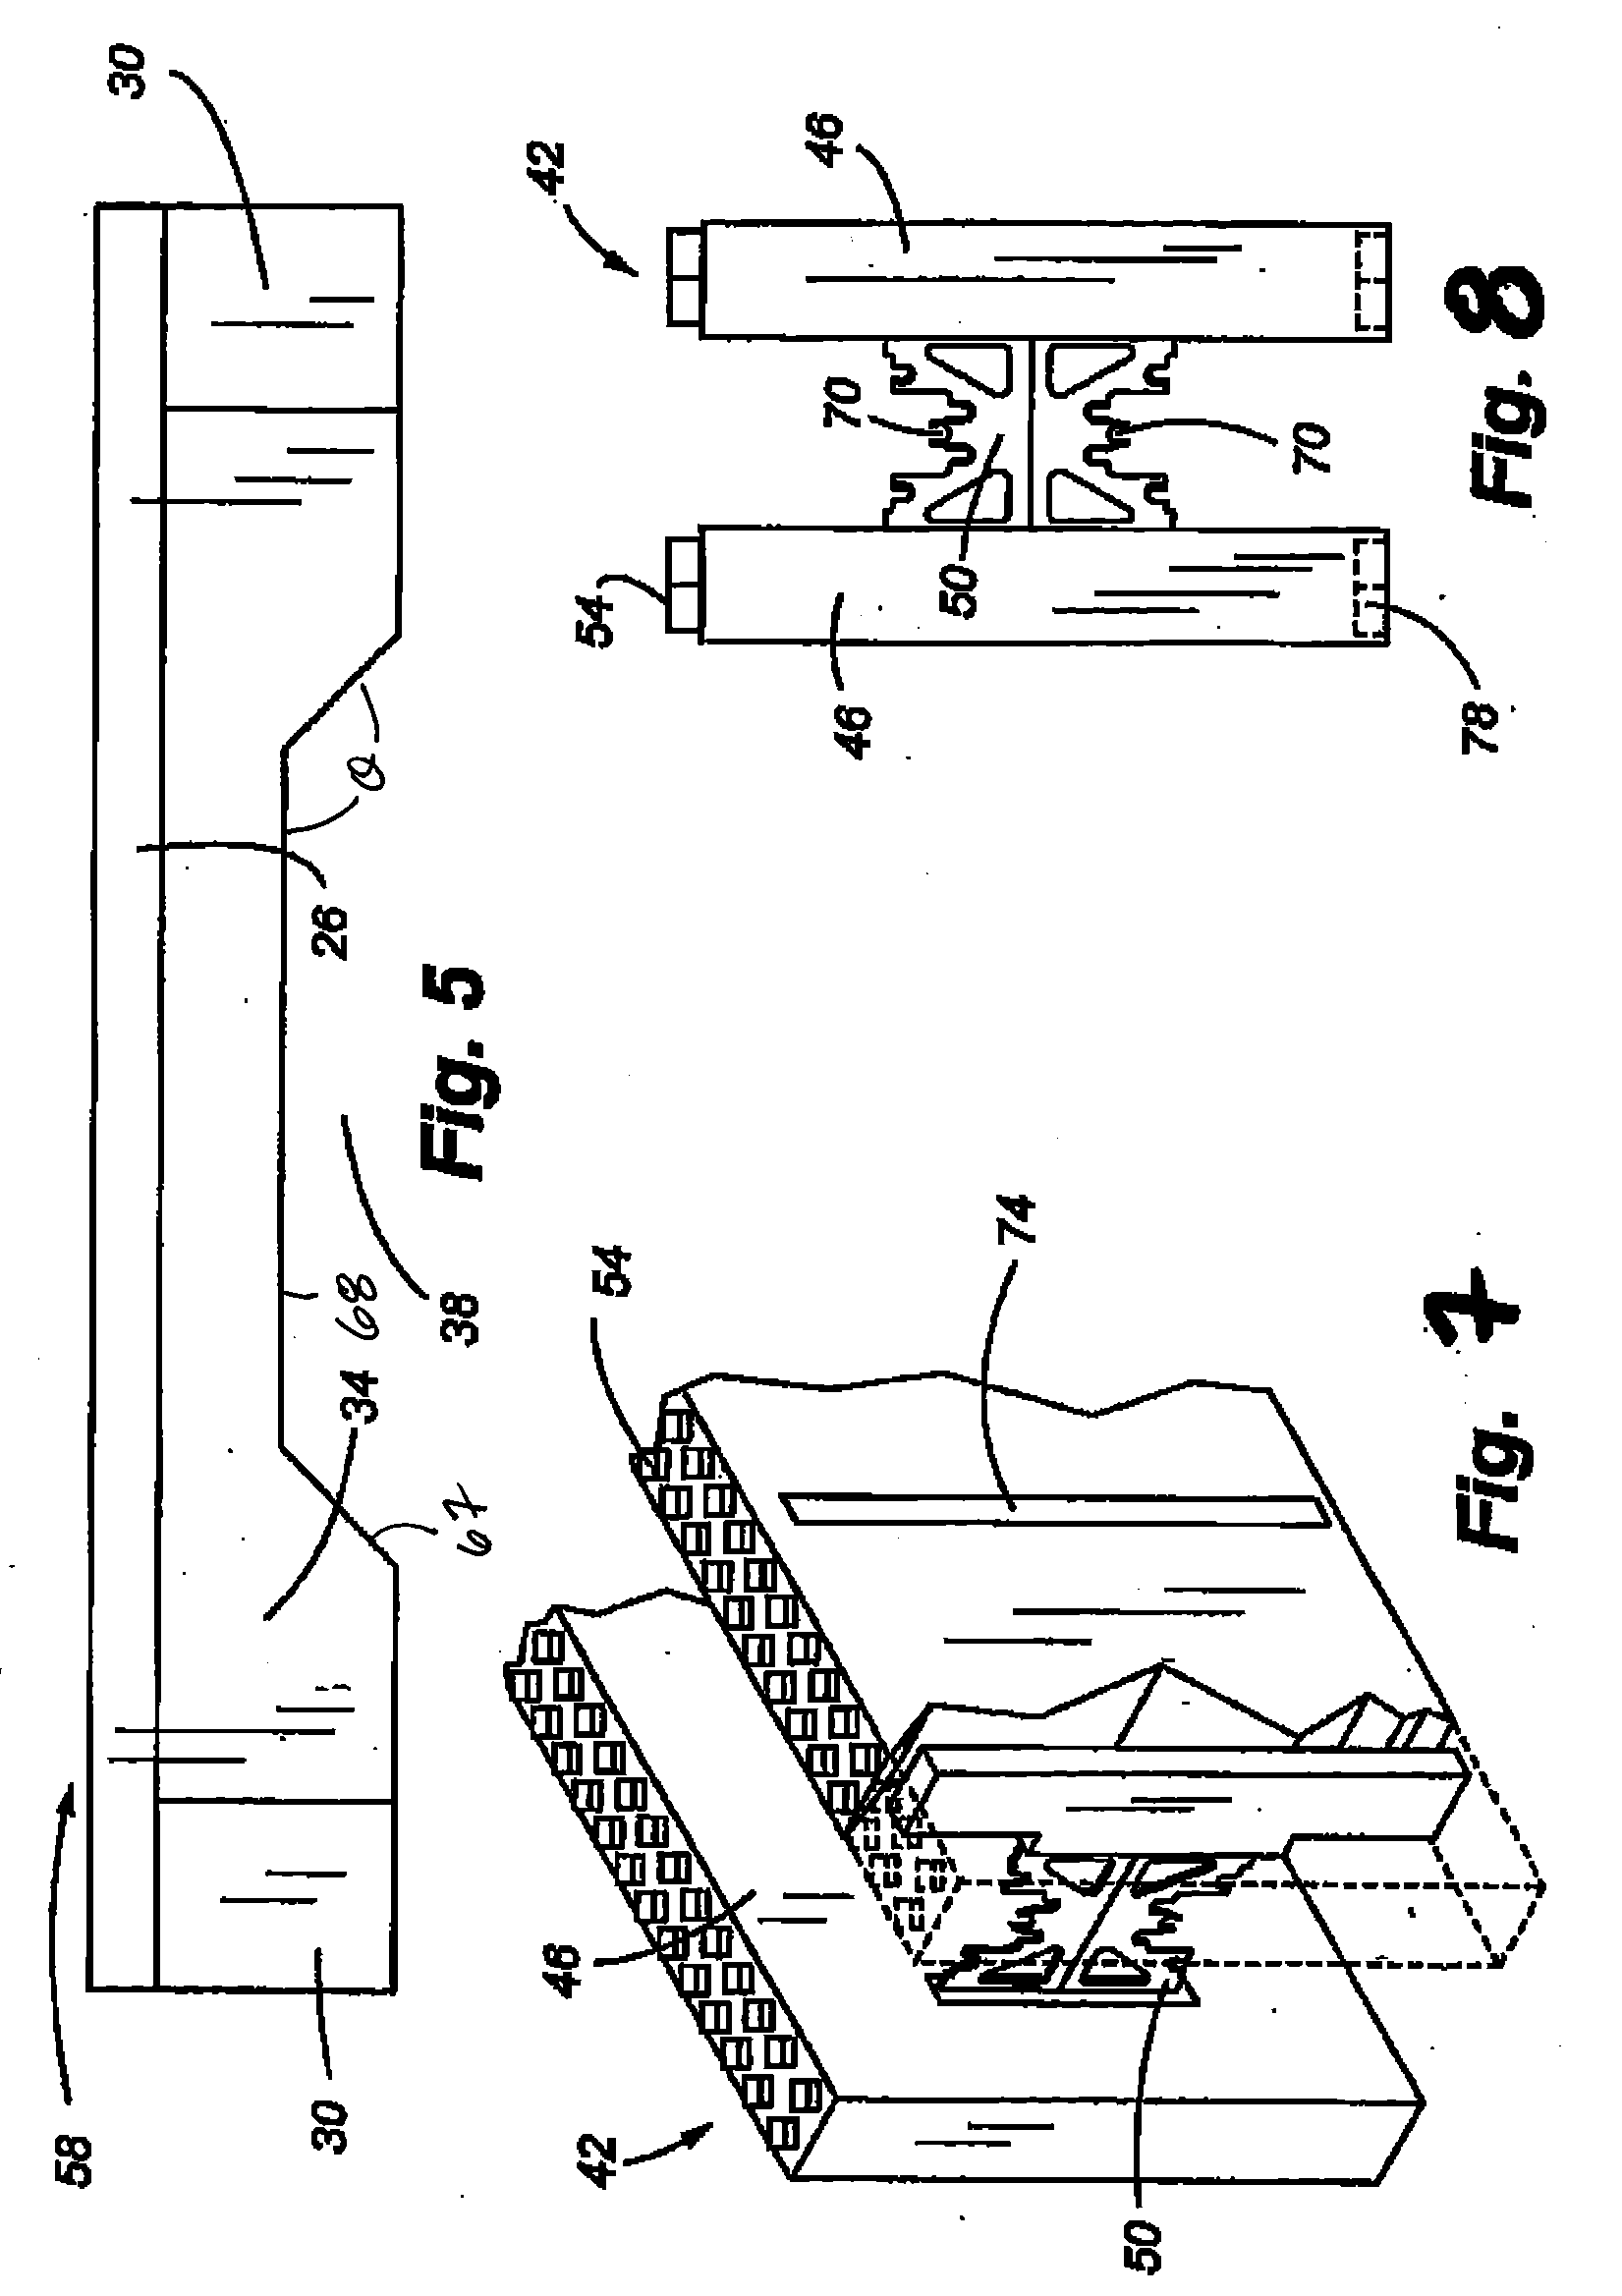 Apparatus and method for forming an opening in a concrete wall system